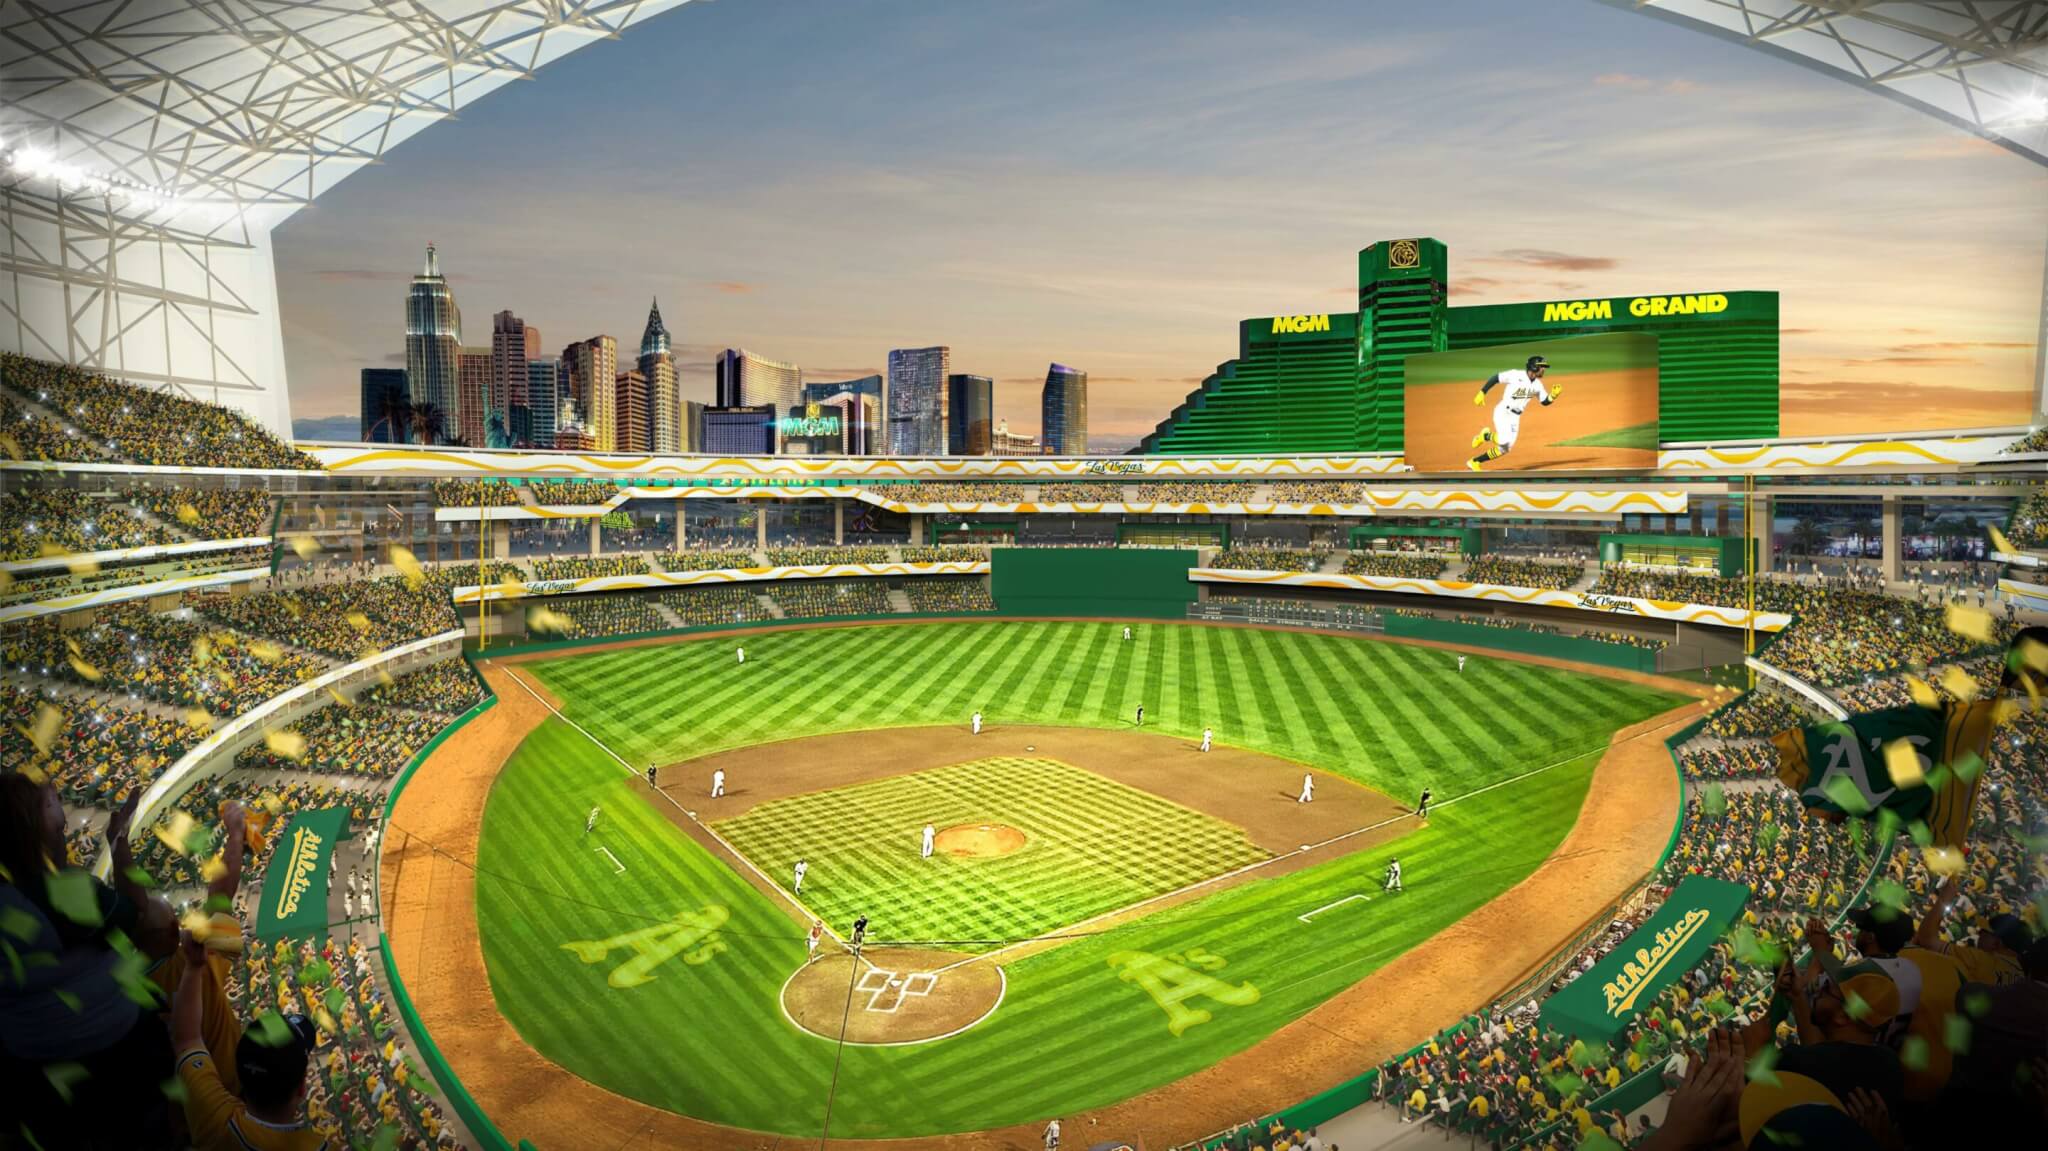 Recent history says the A's could play in a minor league park